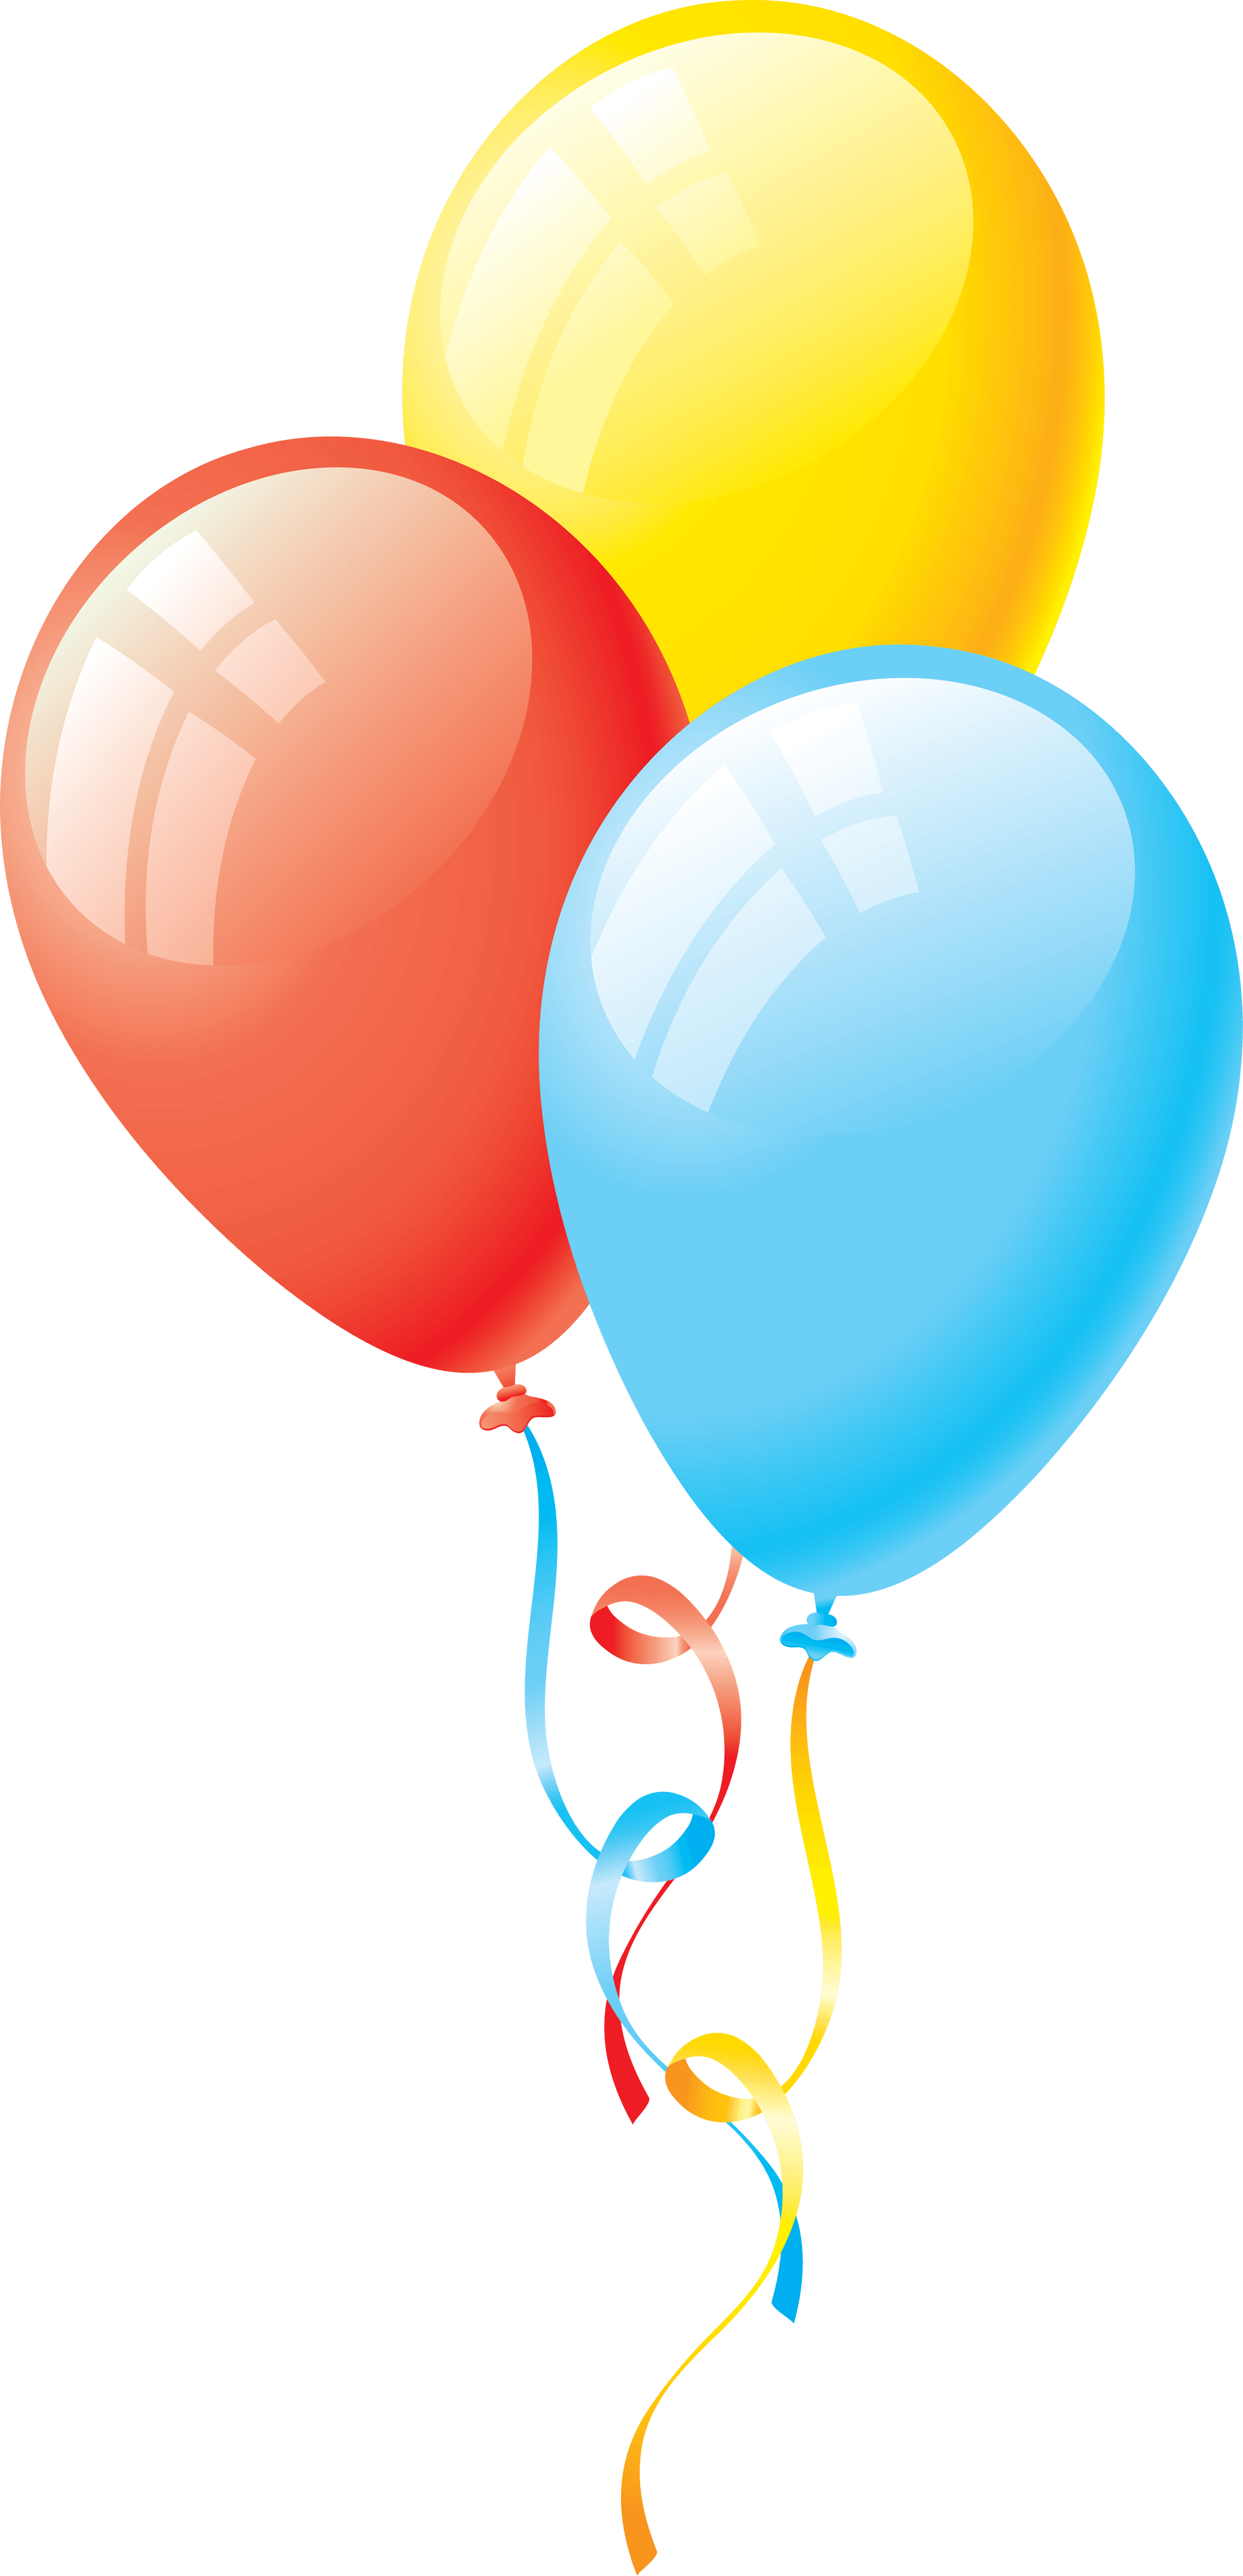 Colorful Balloon Png Image Download Balloons PNG Image